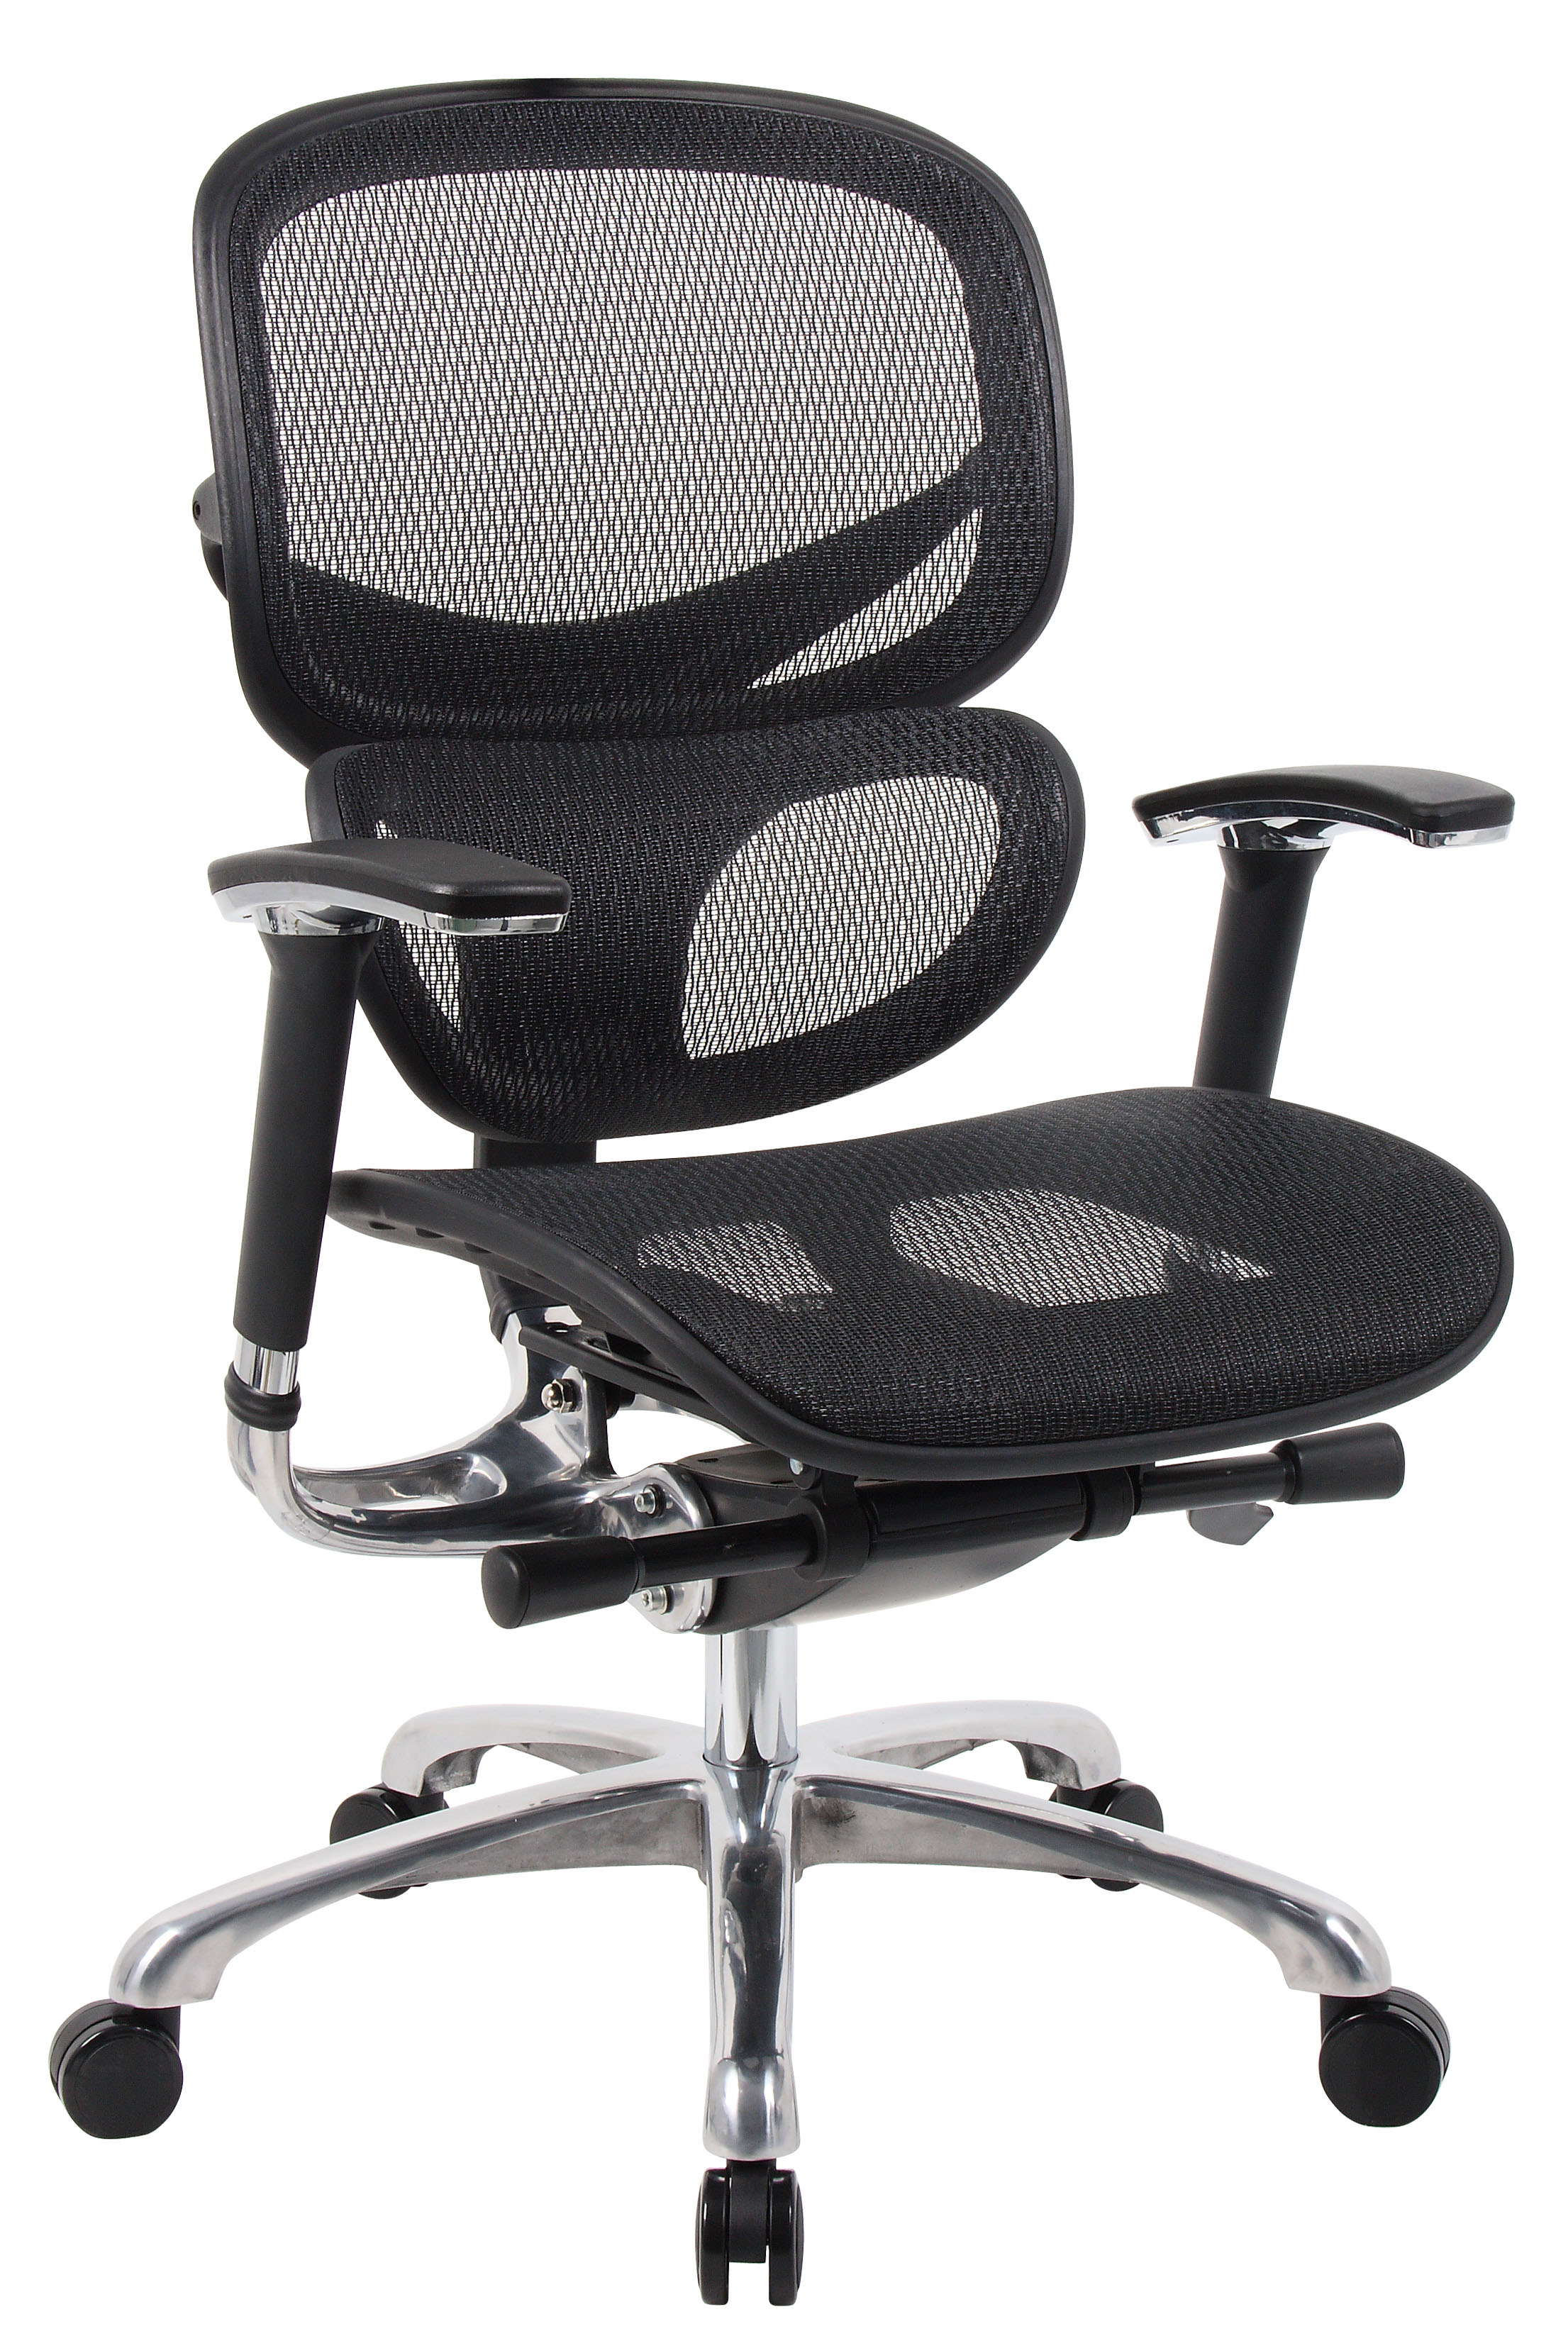 B6888-bk Task Chair With Mesh Seat